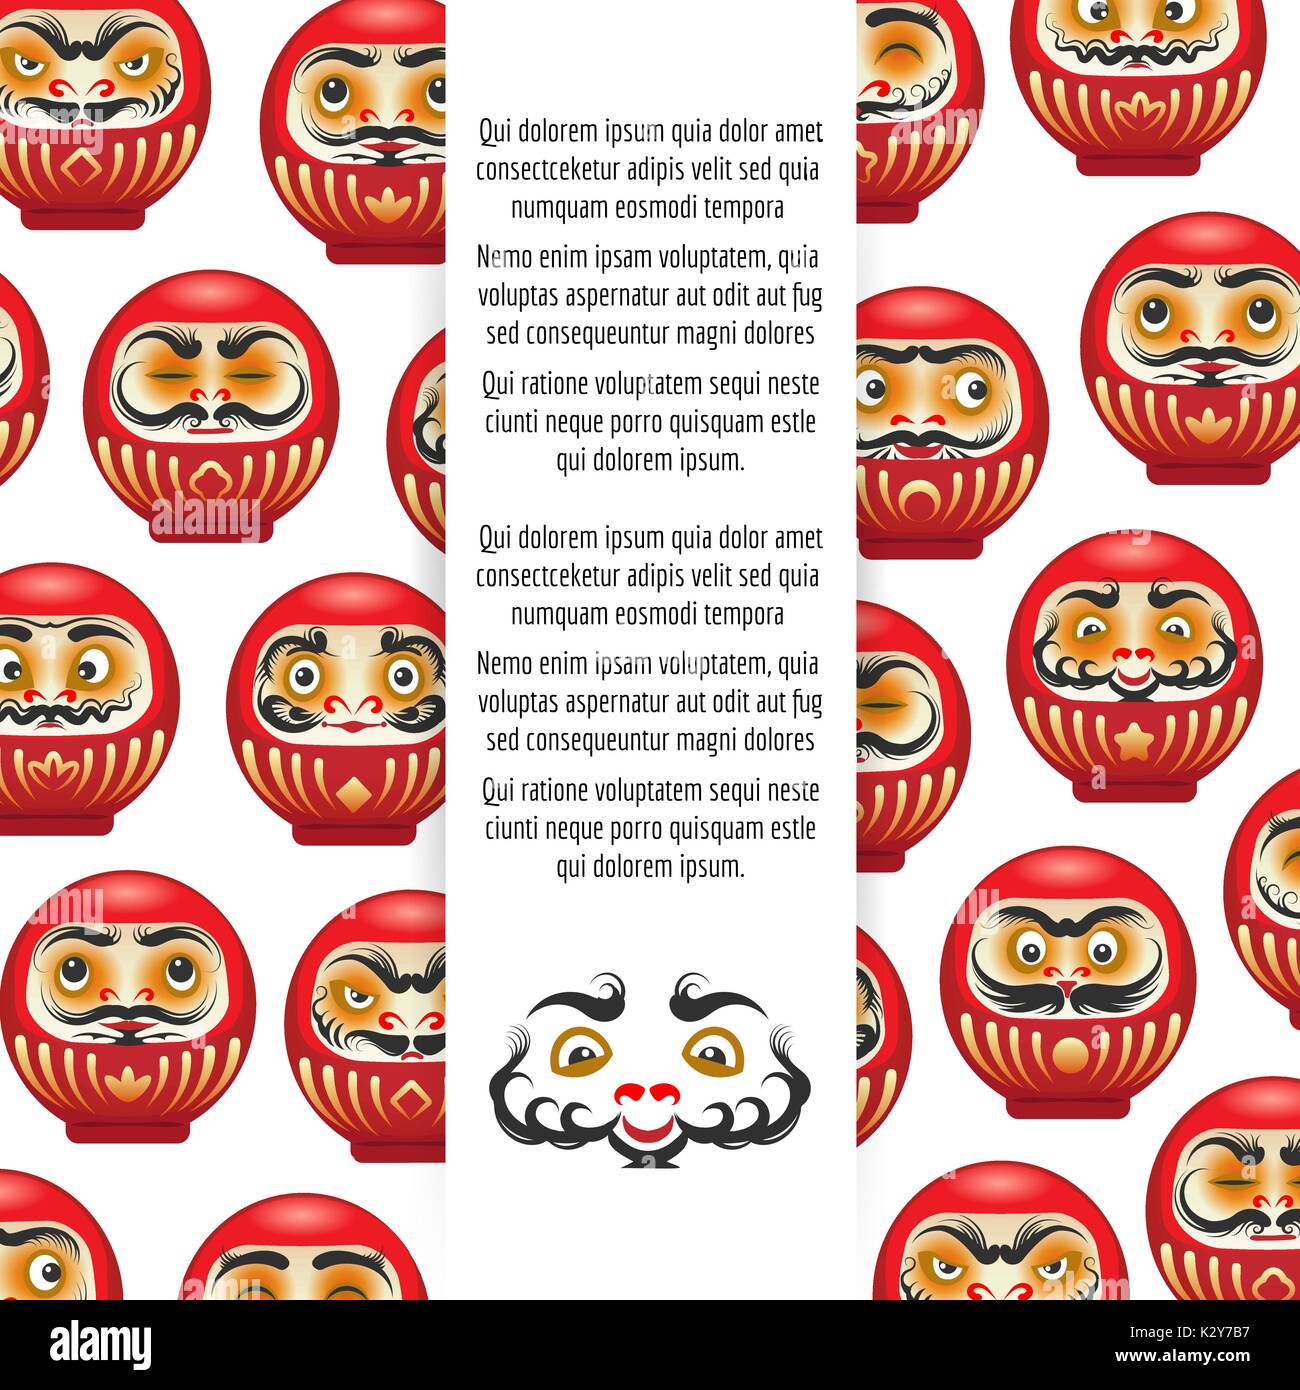 Illustration Of Red Daruma Figurine For Japanese New Year Stock  Illustration - Download Image Now - iStock